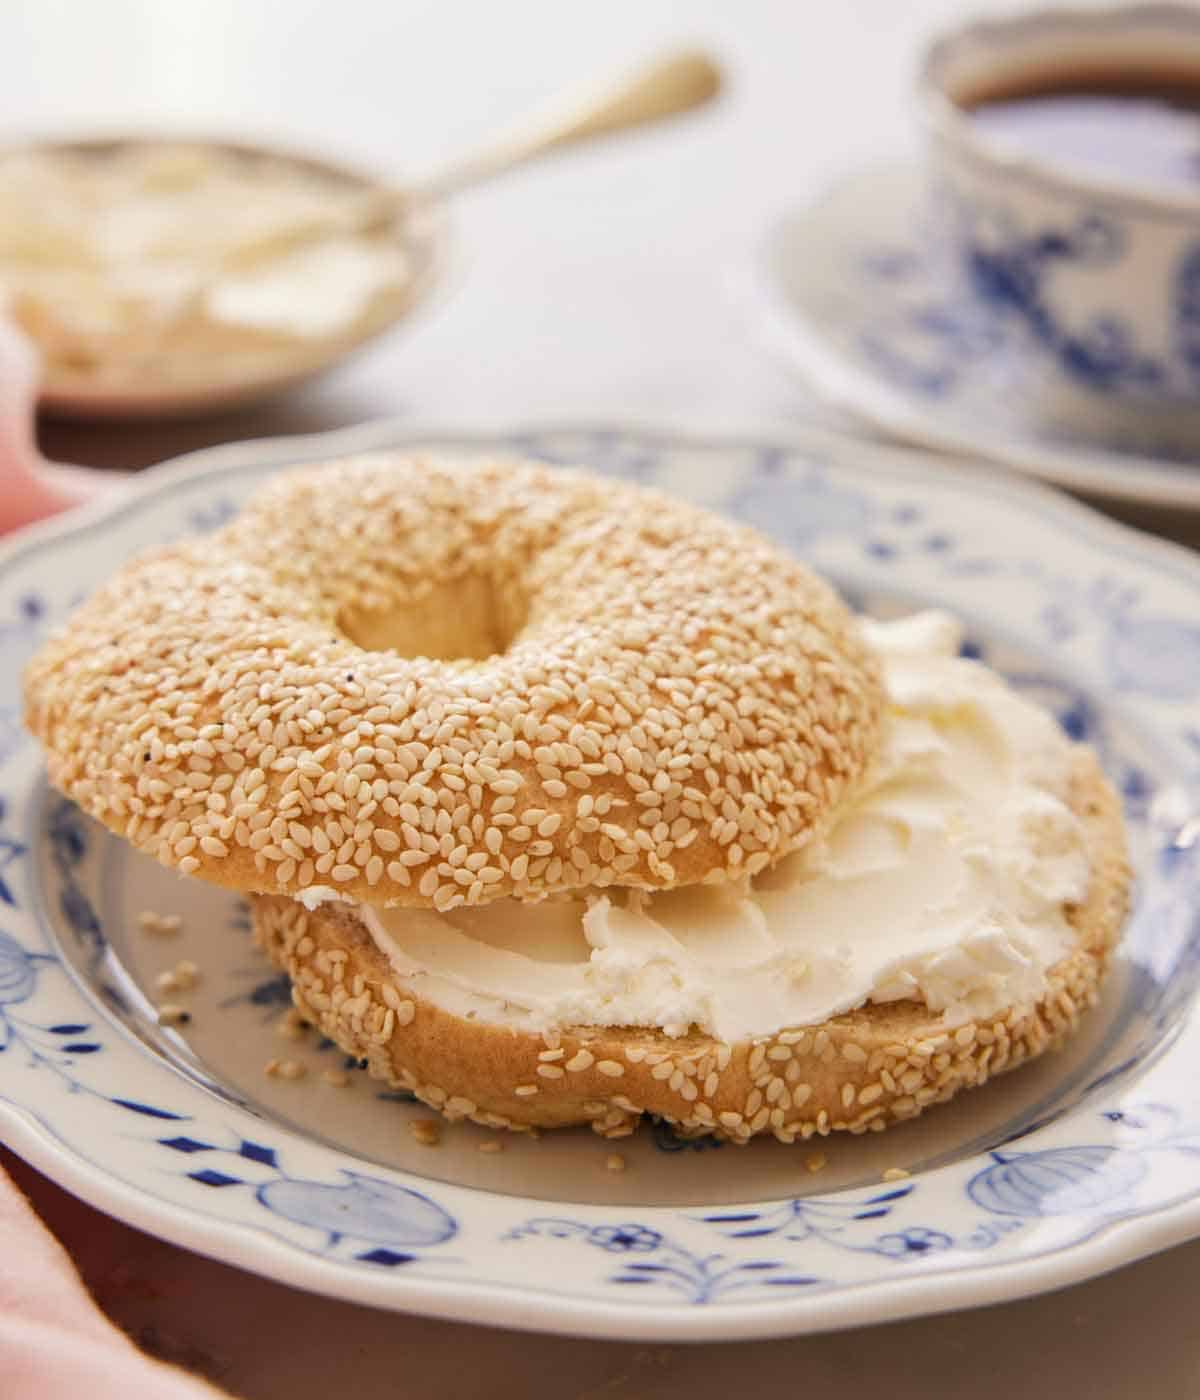 A bagel cut in half with cream cheese smeared in the middle.